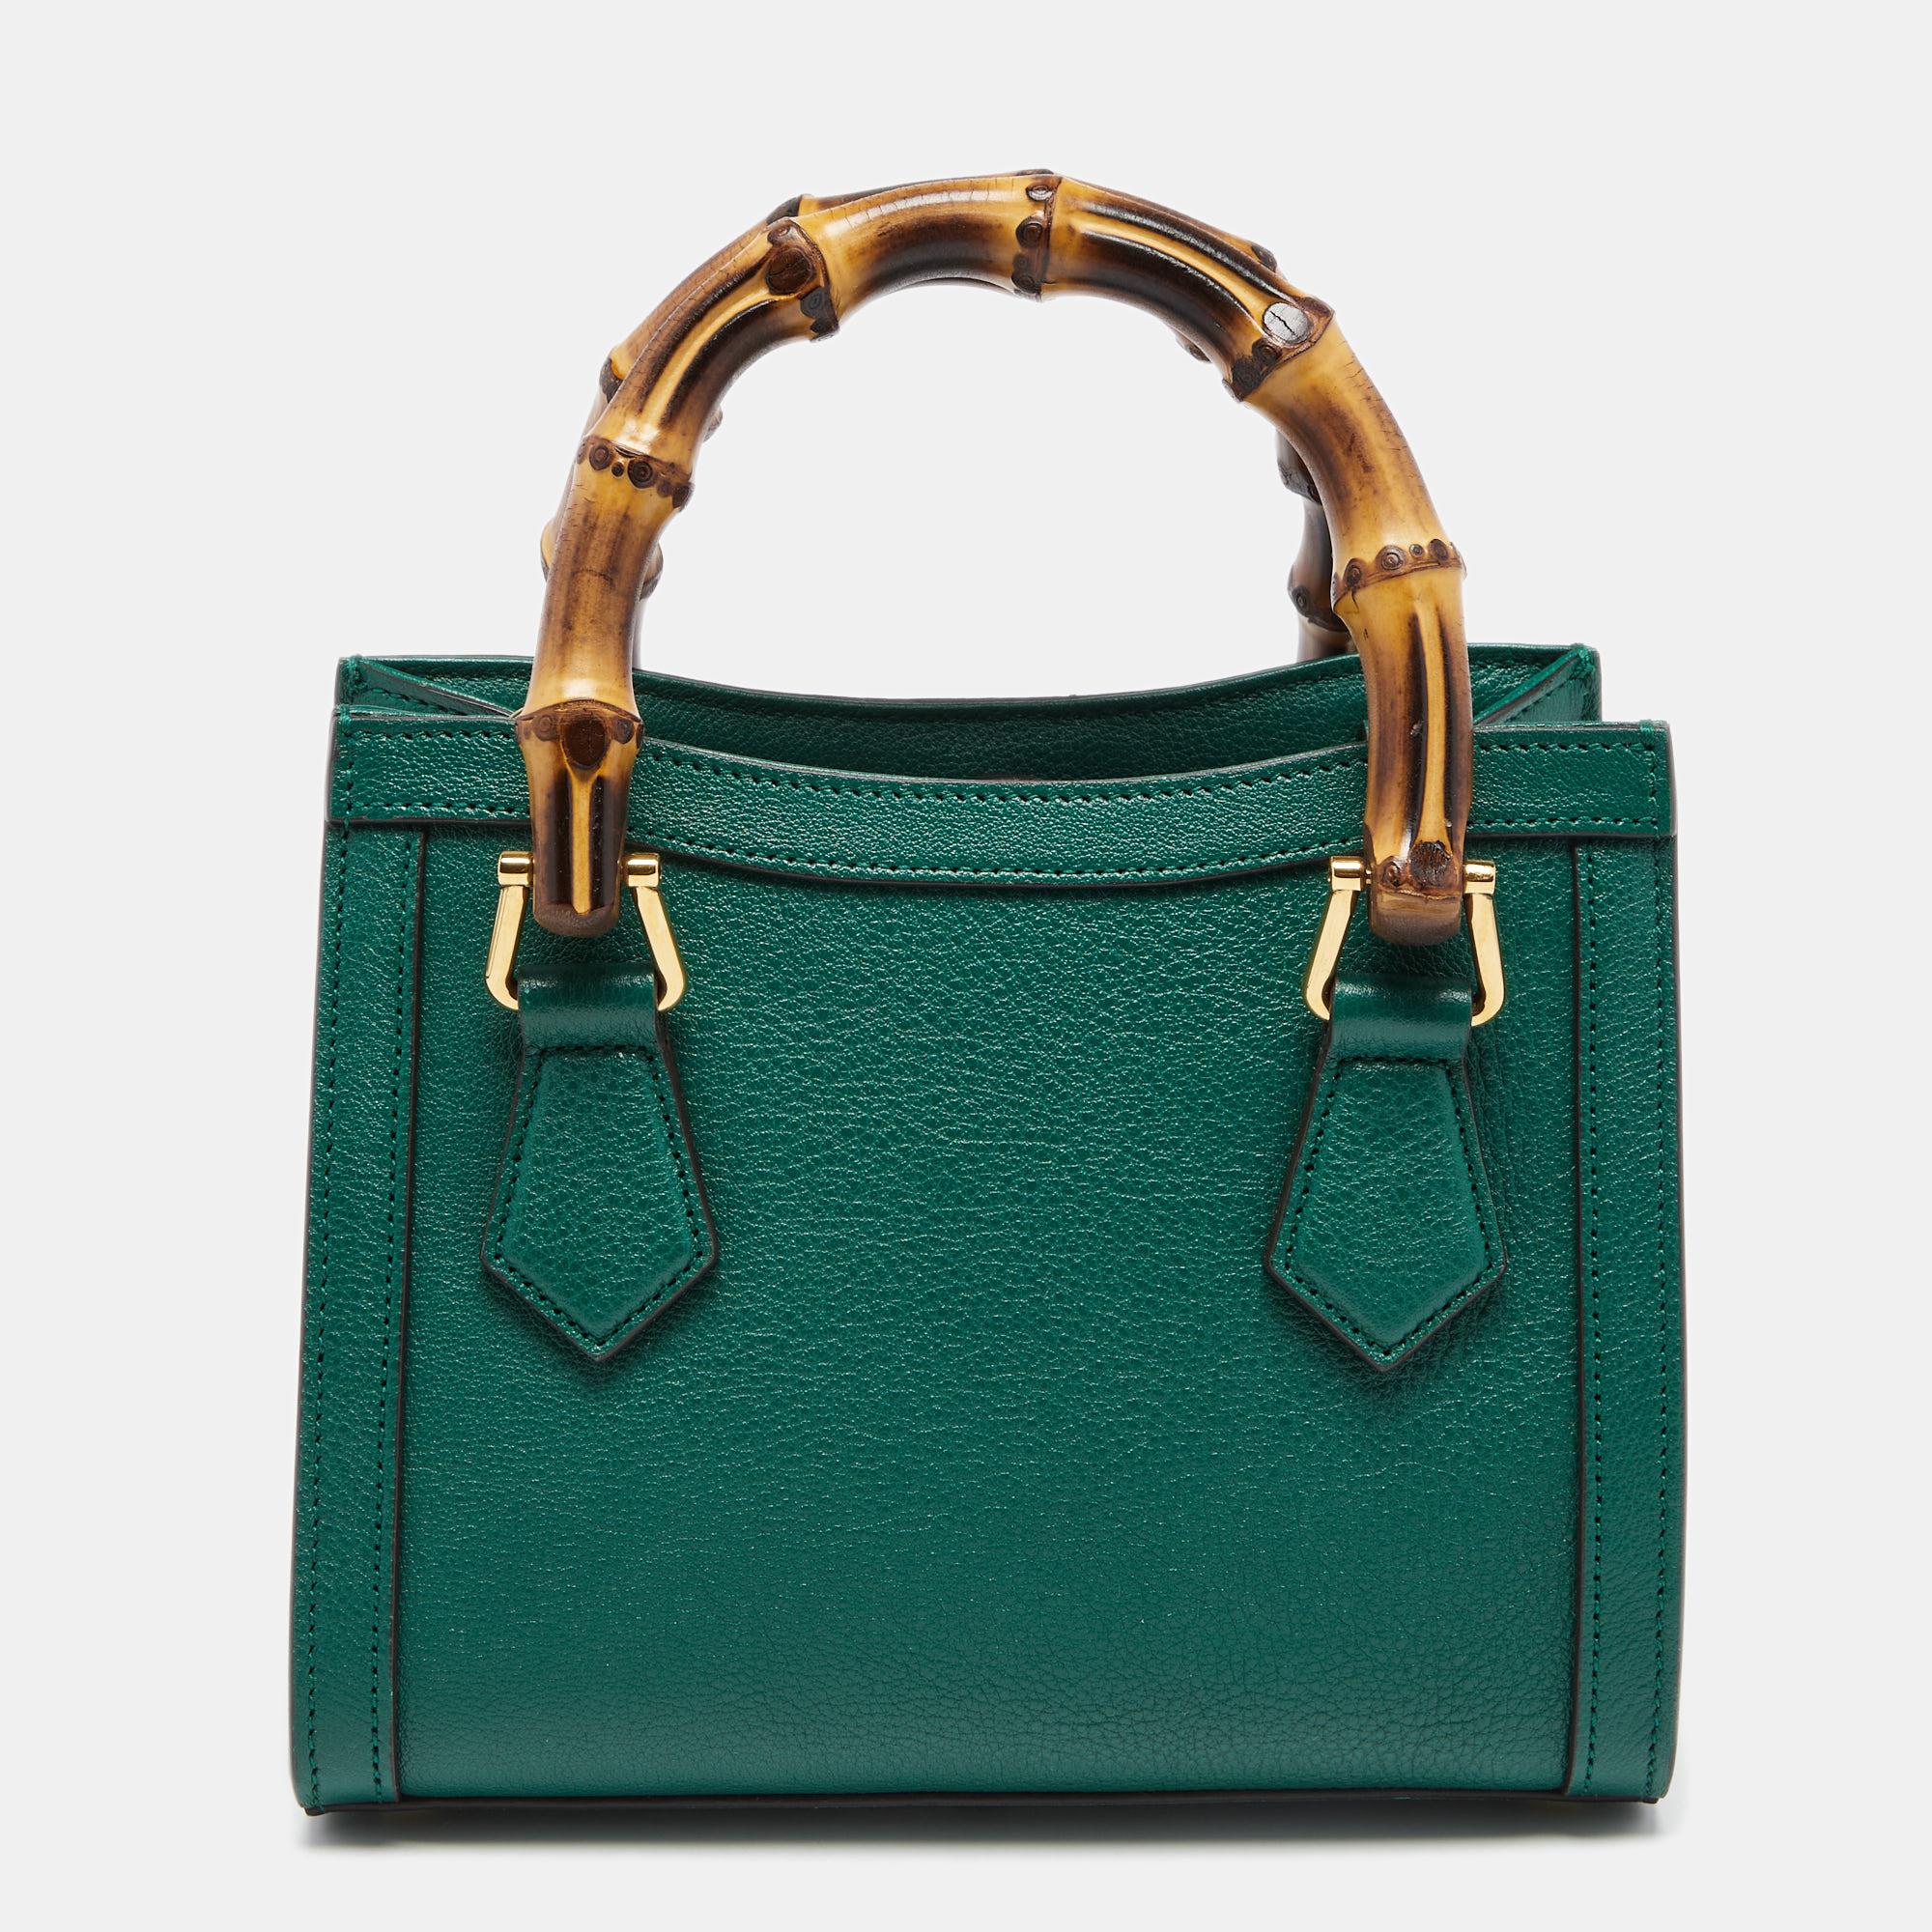 Coming from Gucci is this green tote that is the perfect day bag. It is crafted from leather into a structured shape and flaunts gold-tone details, dual handles, a shoulder strap, and a capacious interior for your belongings. The gorgeous bag will